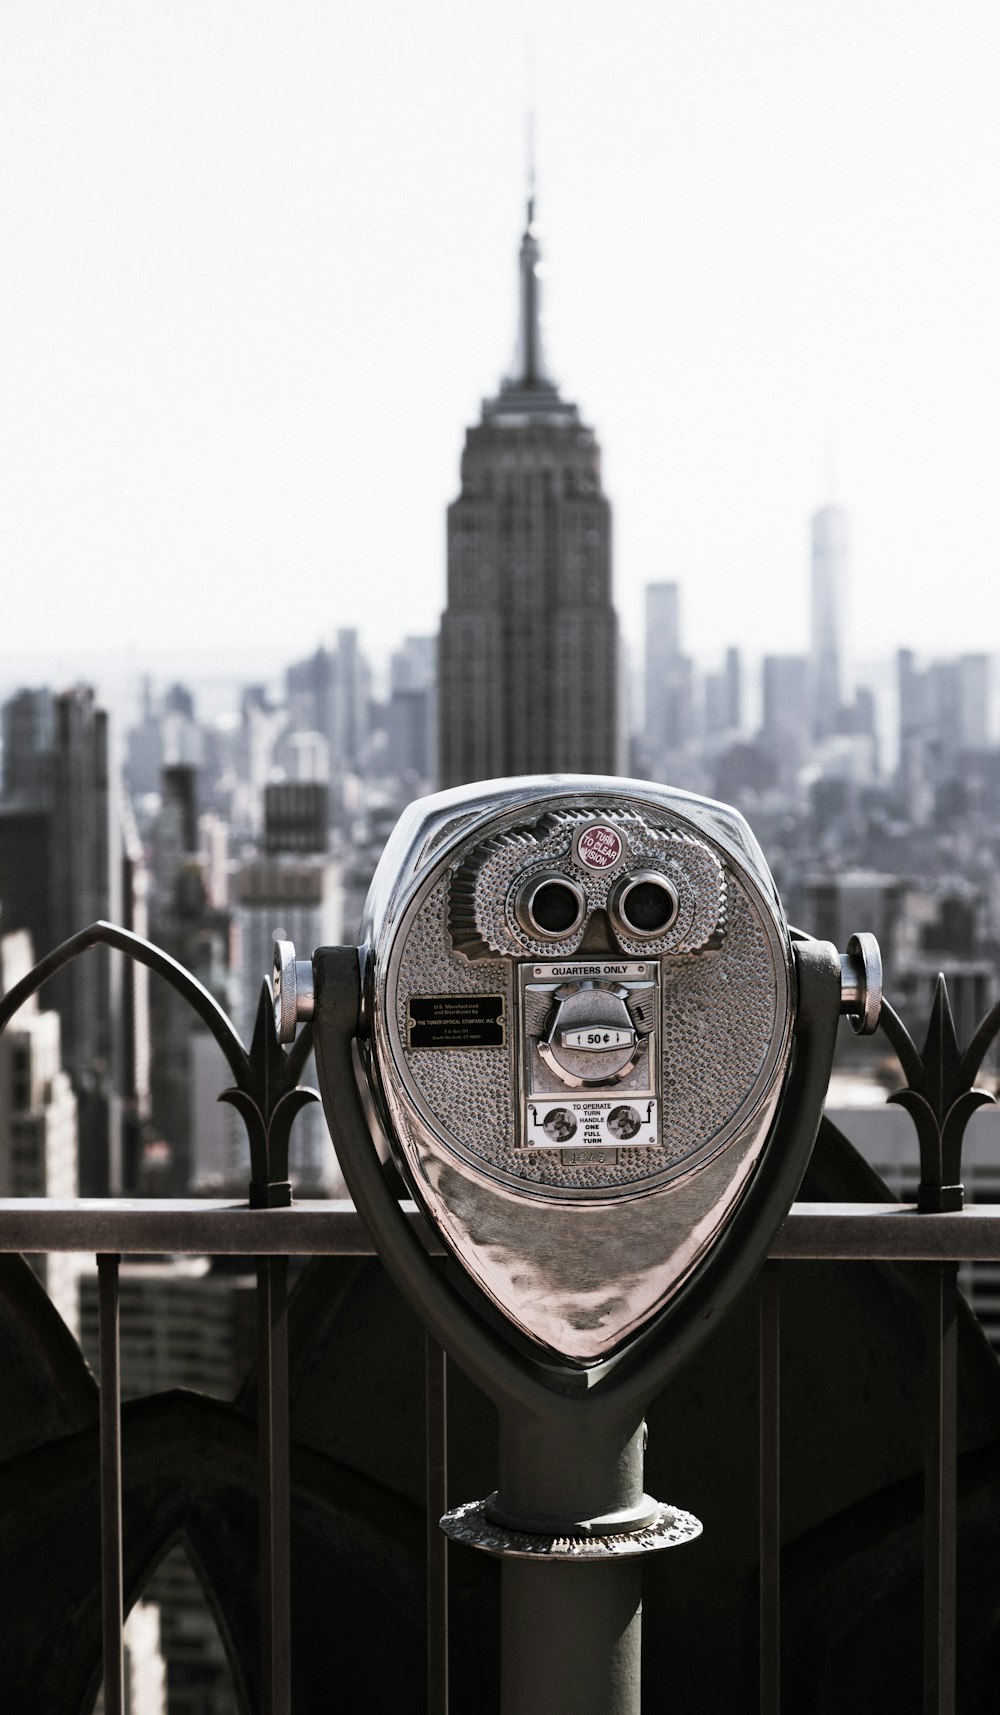 a coin operated parking meter overlooking a city skyline